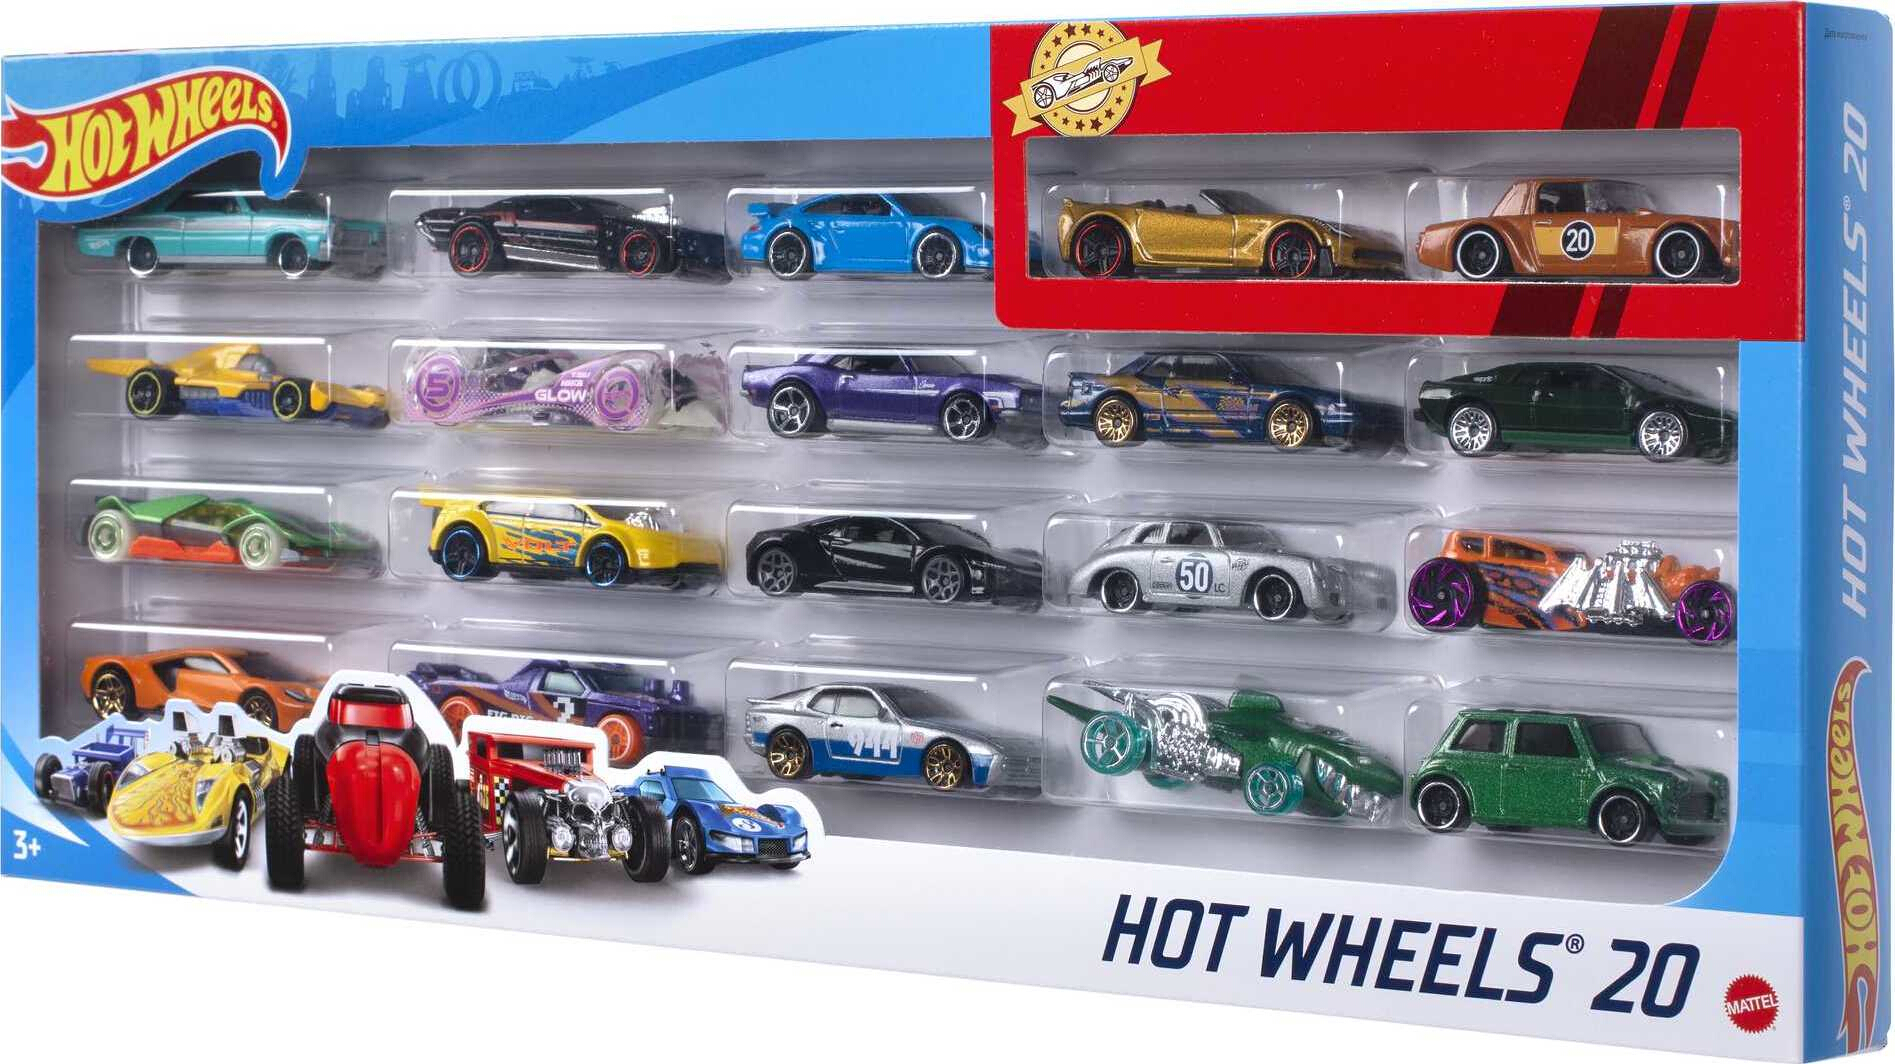 Hot Wheels Set of 20 Toy Sports & Race Cars in 1:64 Scale, Collectible Vehicles (Styles May Vary) - image 1 of 7